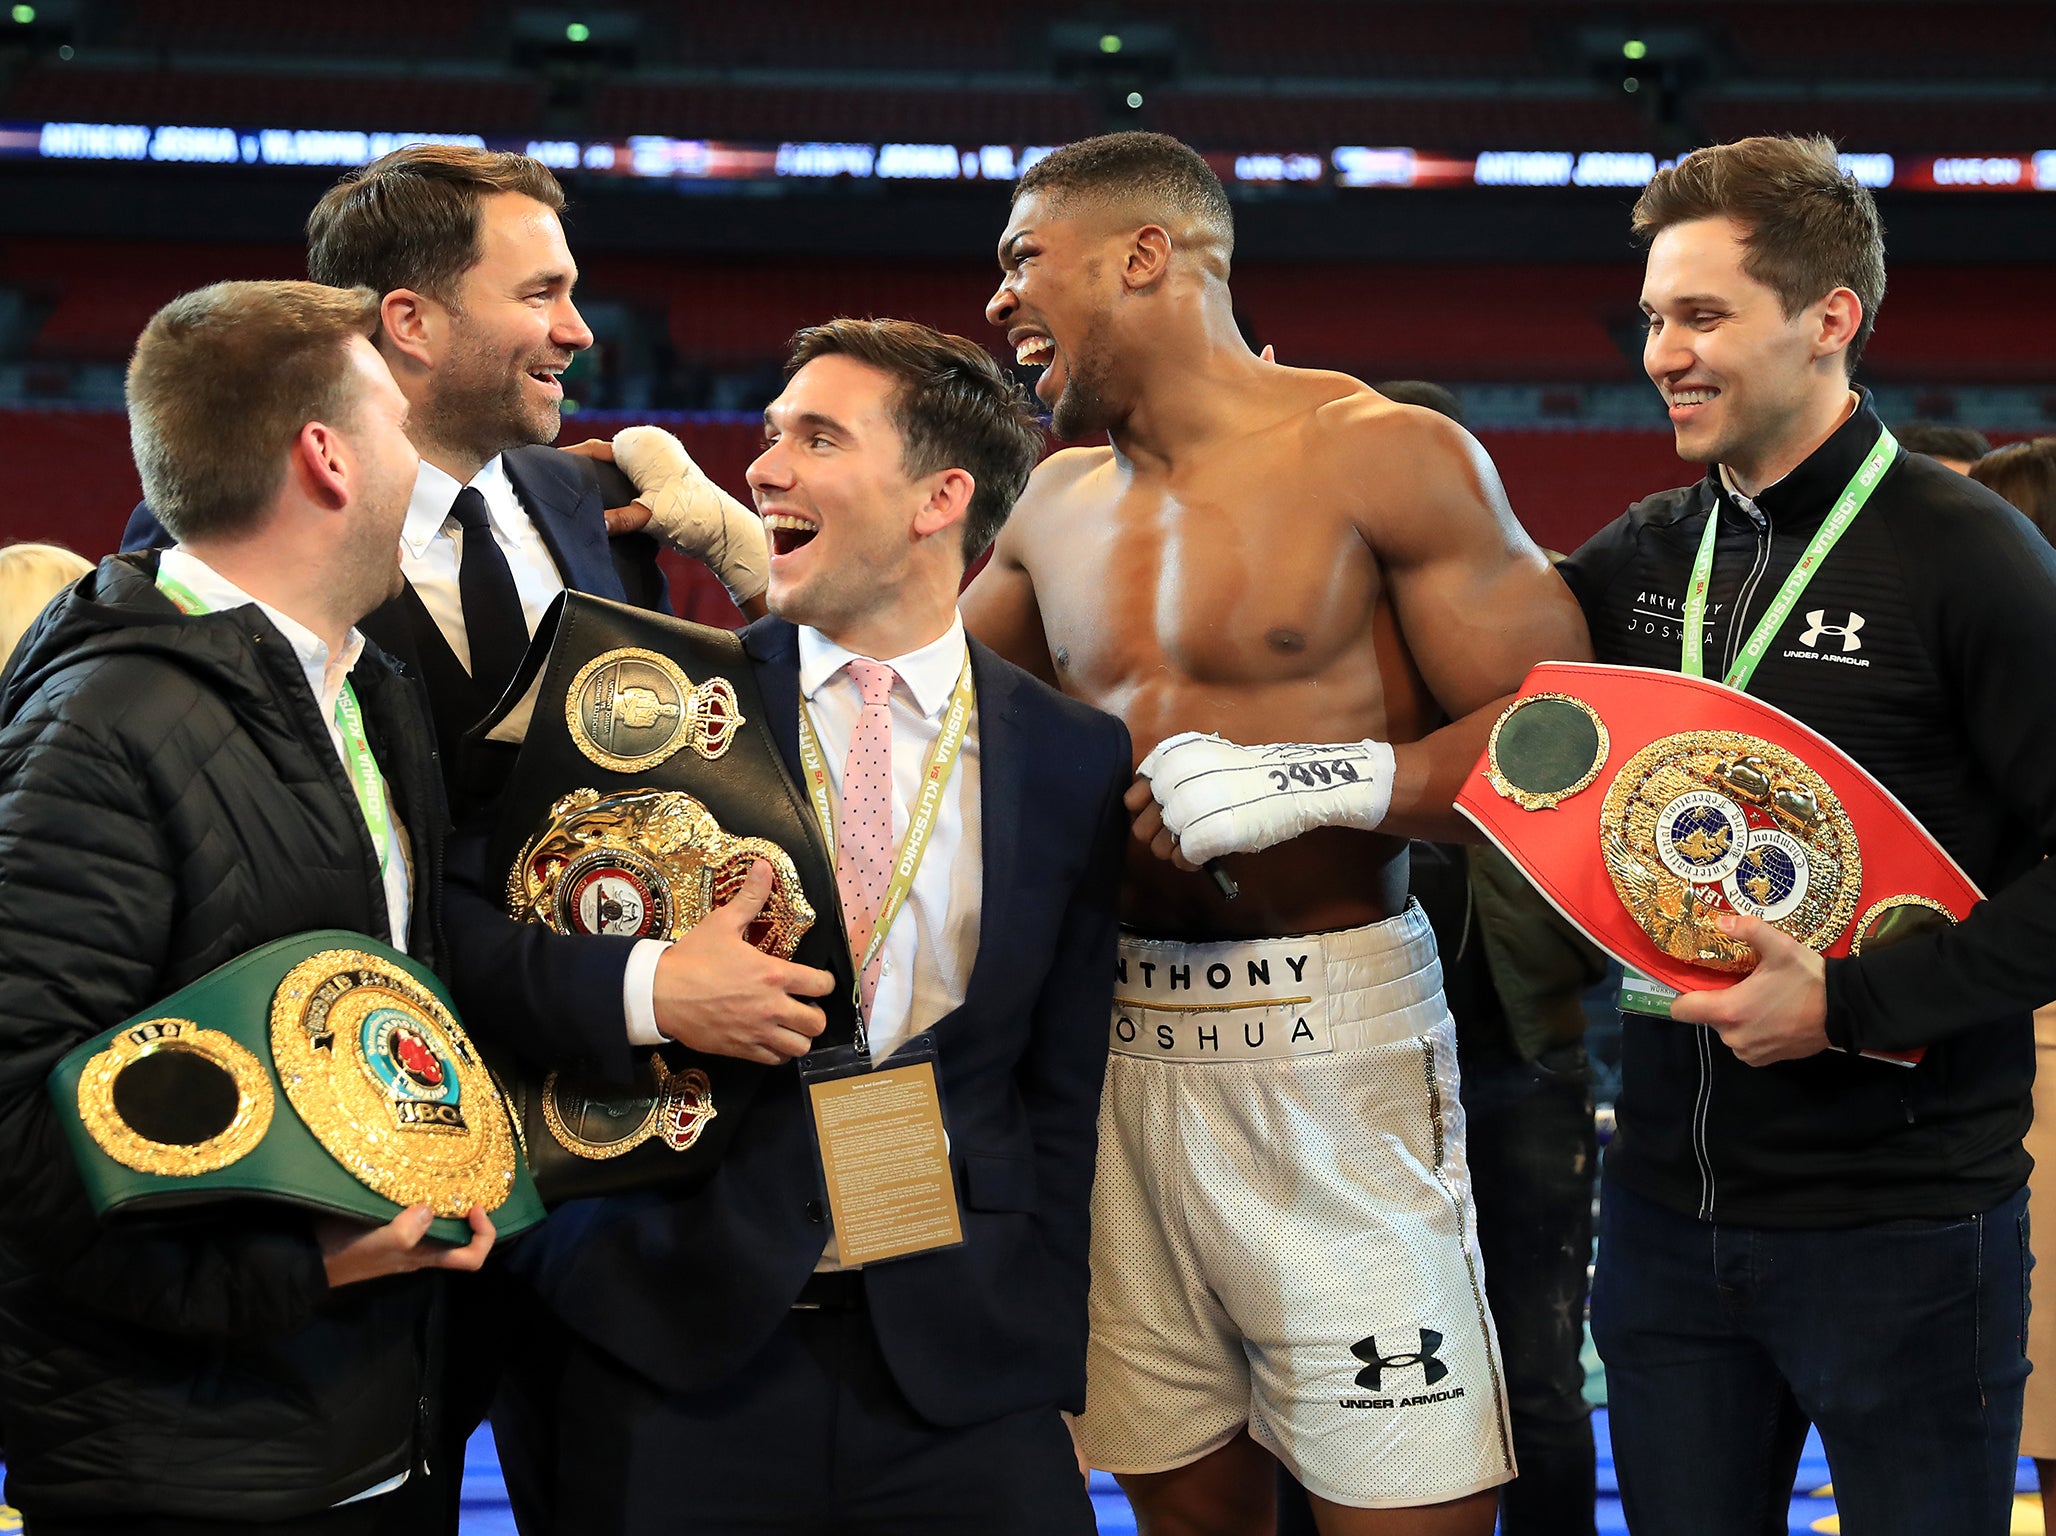 Hearn has also insisted there is a rematch clause in the fight contract